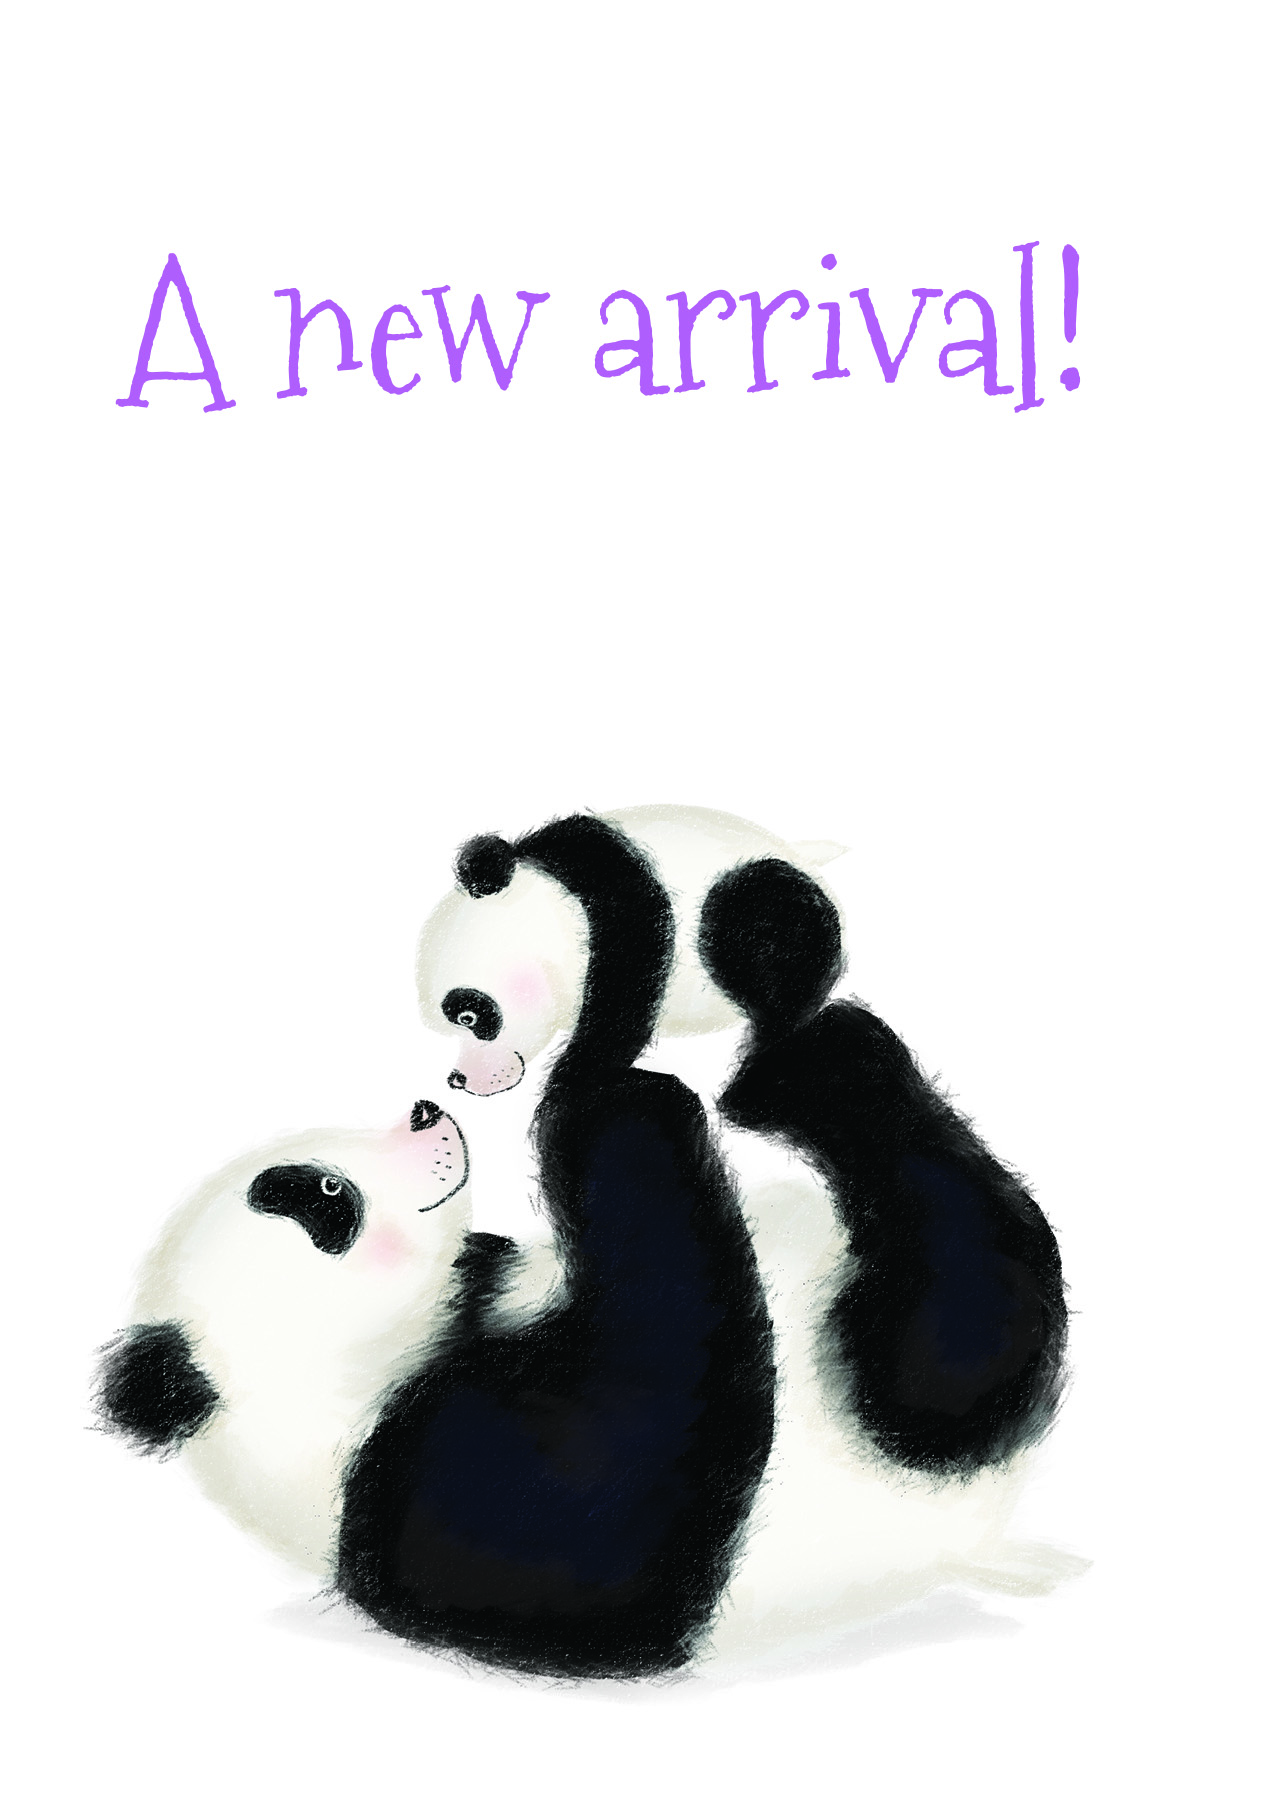 Panda and cub with A new arrival! written above them in purple